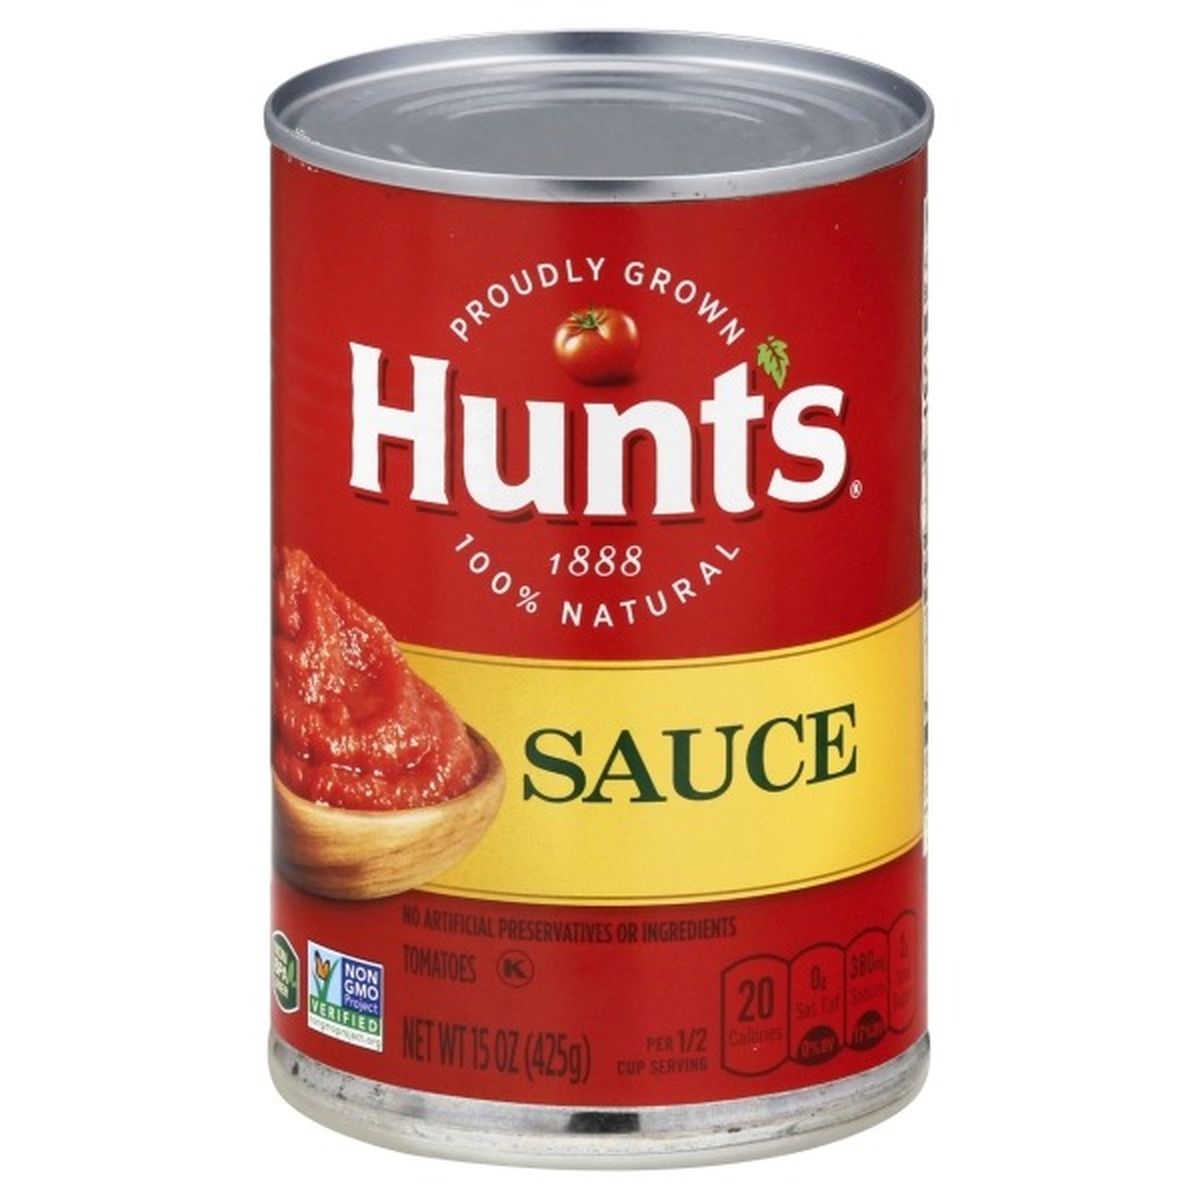 Calories in Hunt's Sauce, Tomatoes